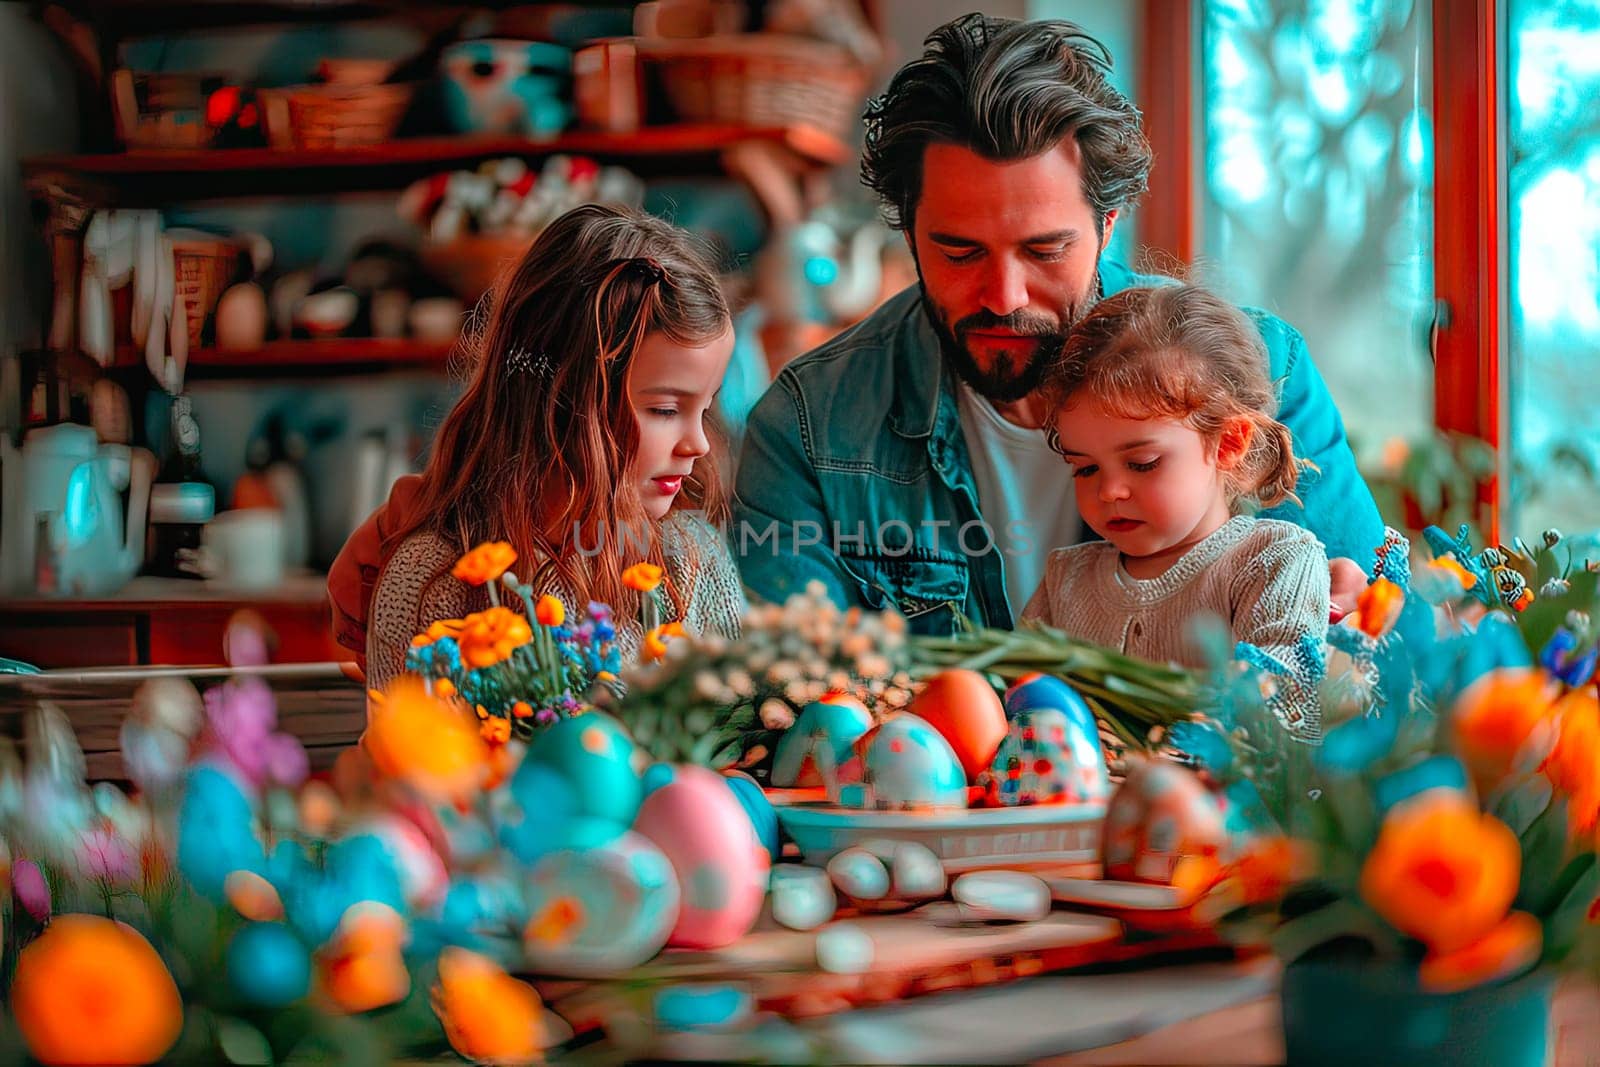 A father and his two daughters are sitting at a table. On the table are dishes with dyed eggs and lots of flowers. The family is painting Easter eggs.